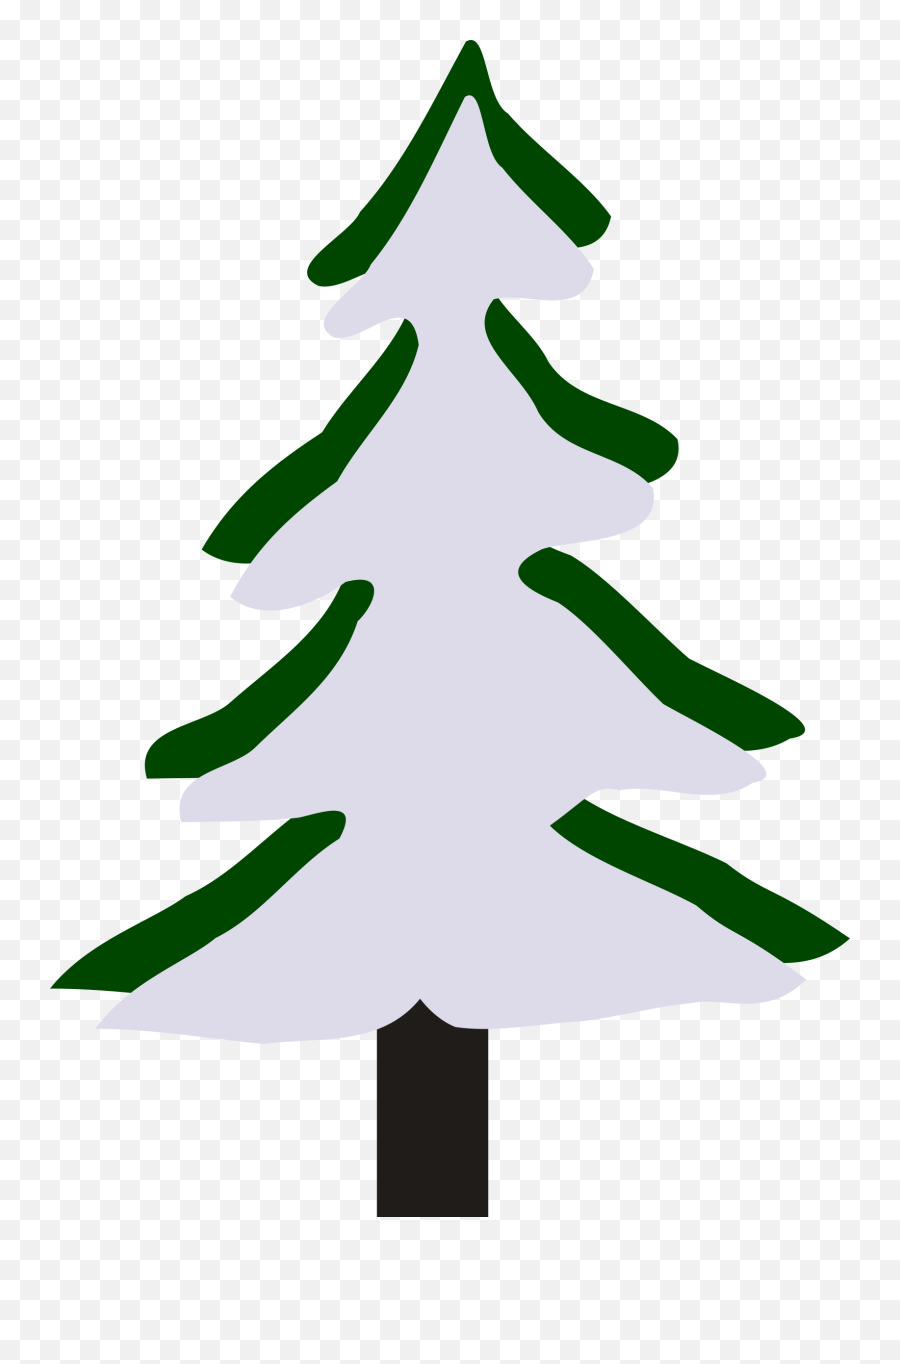 Free Pine Tree Outline Download Free Clip Art Free Clip - Clip Art Emoji,Pine Tree Clipart